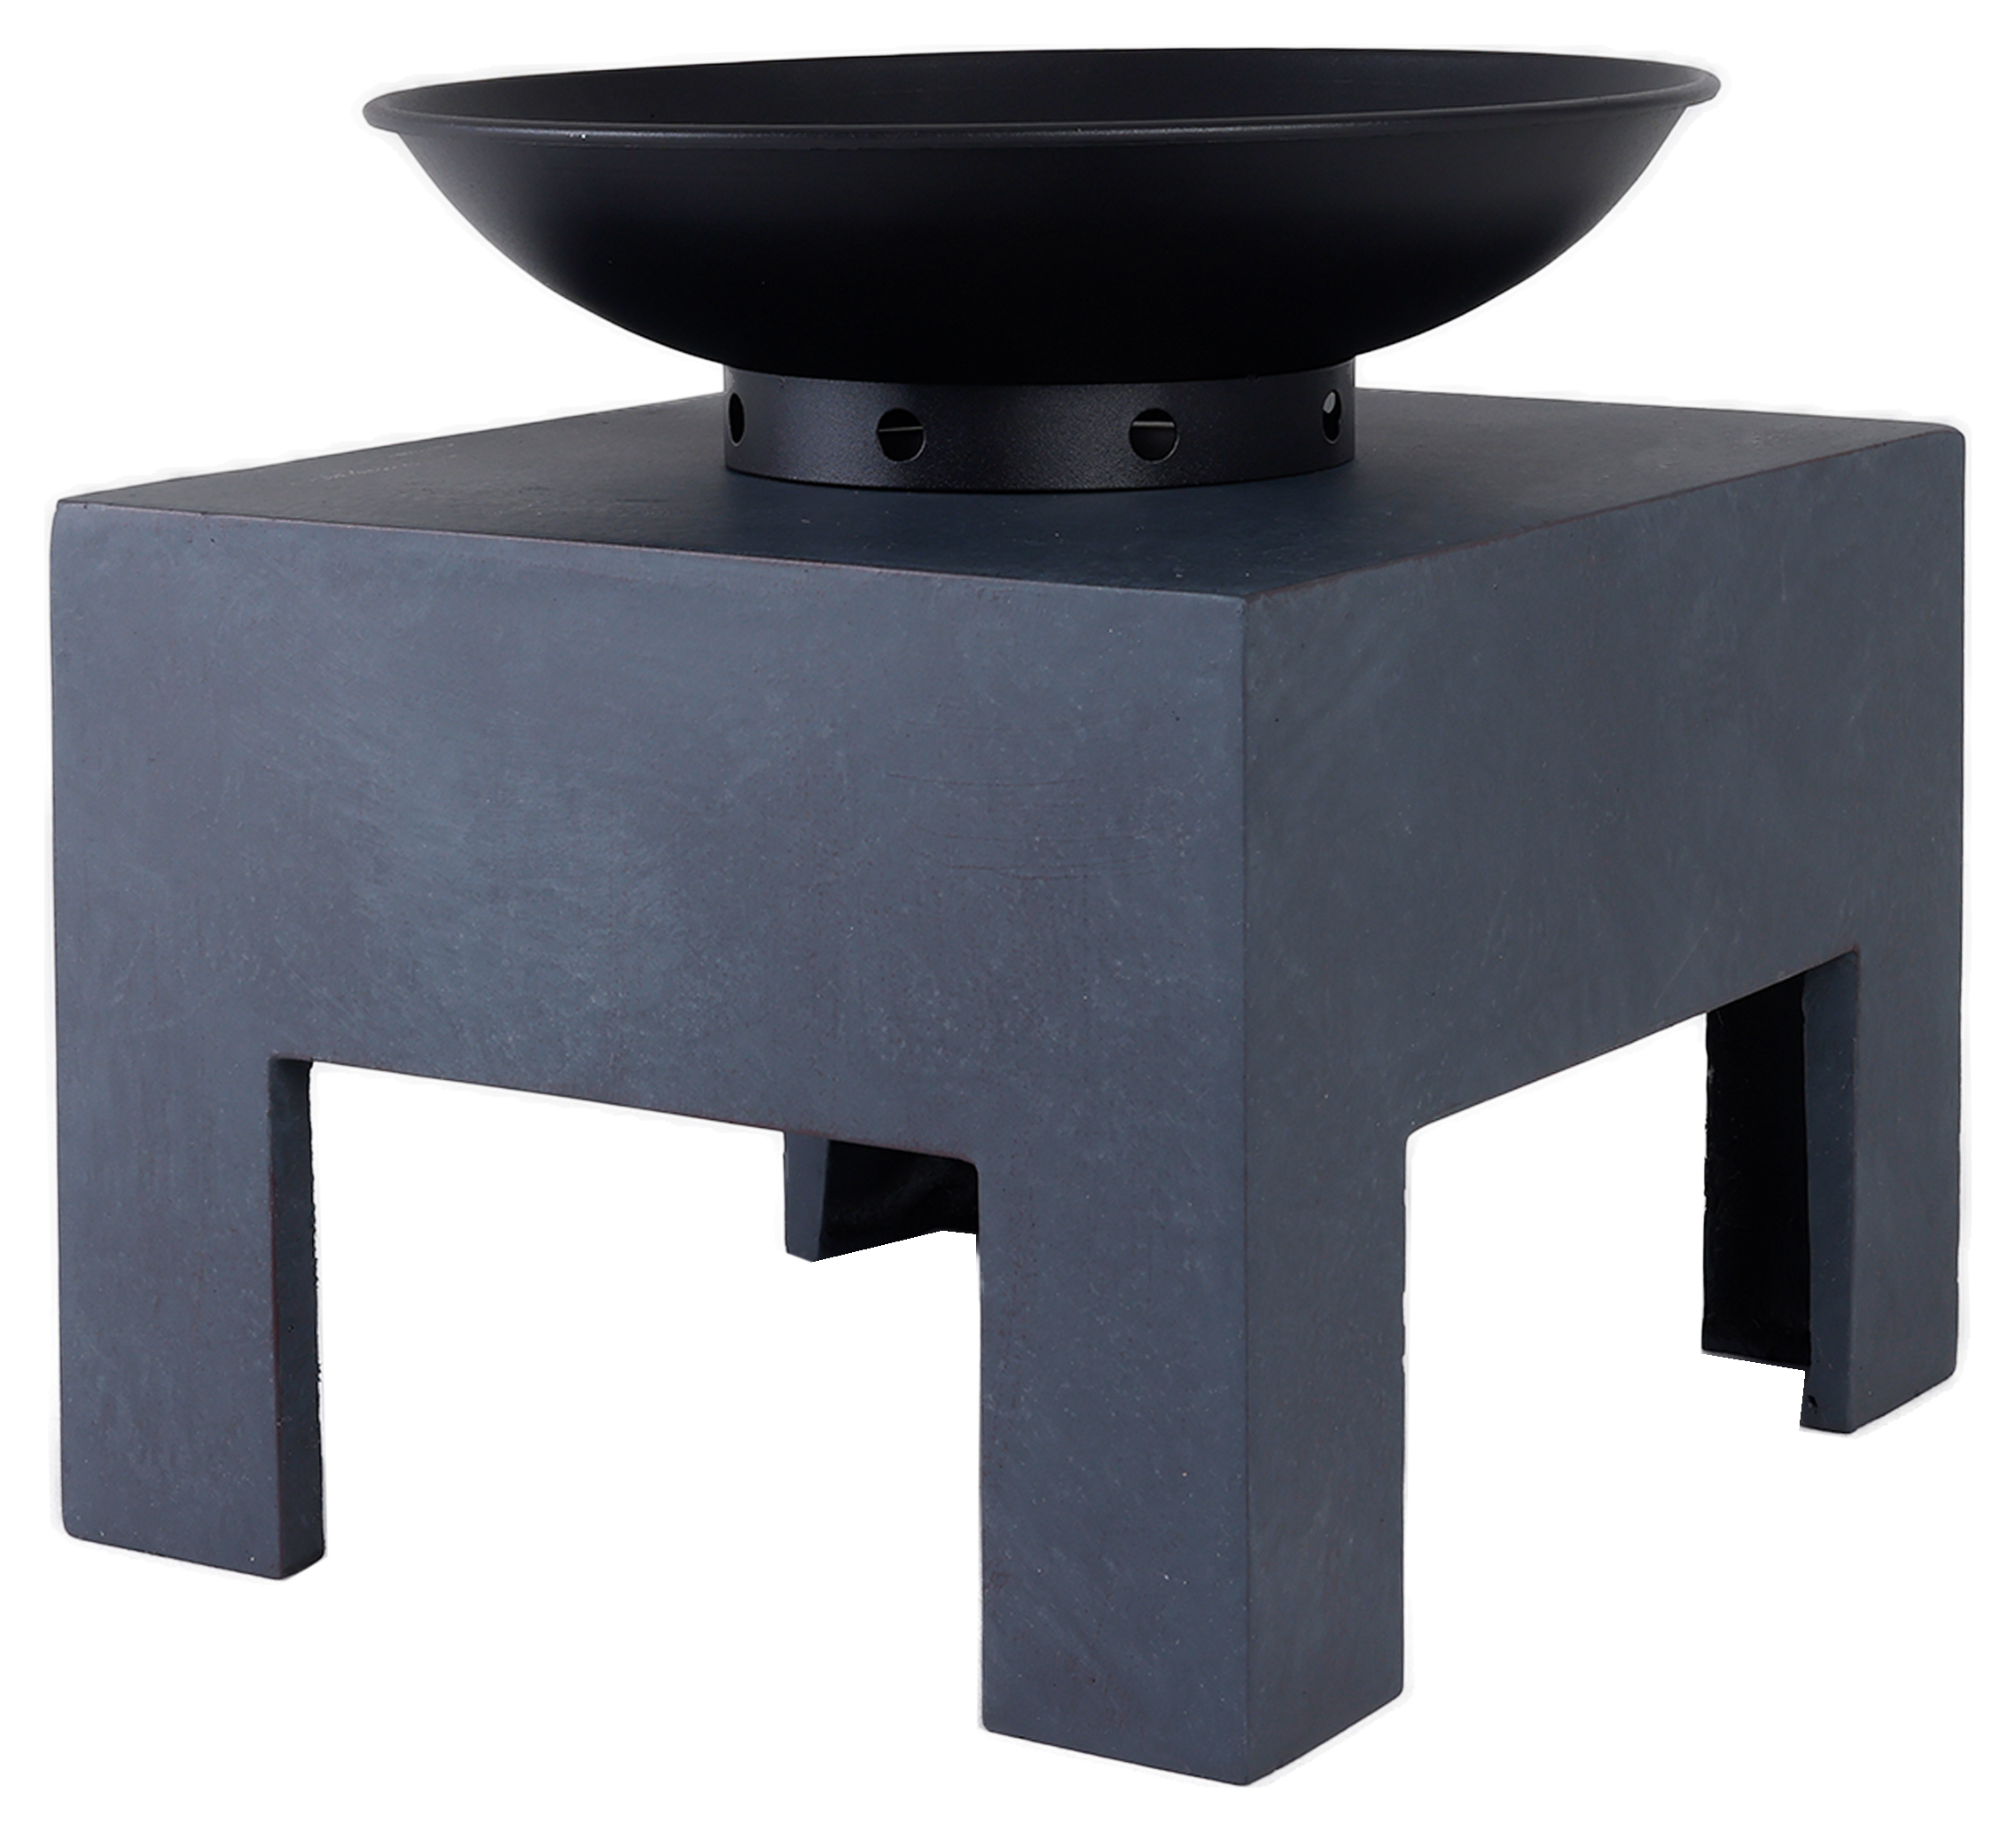 Image of Charles Bentley Metal Outdoor Fire Pit with Square Stand